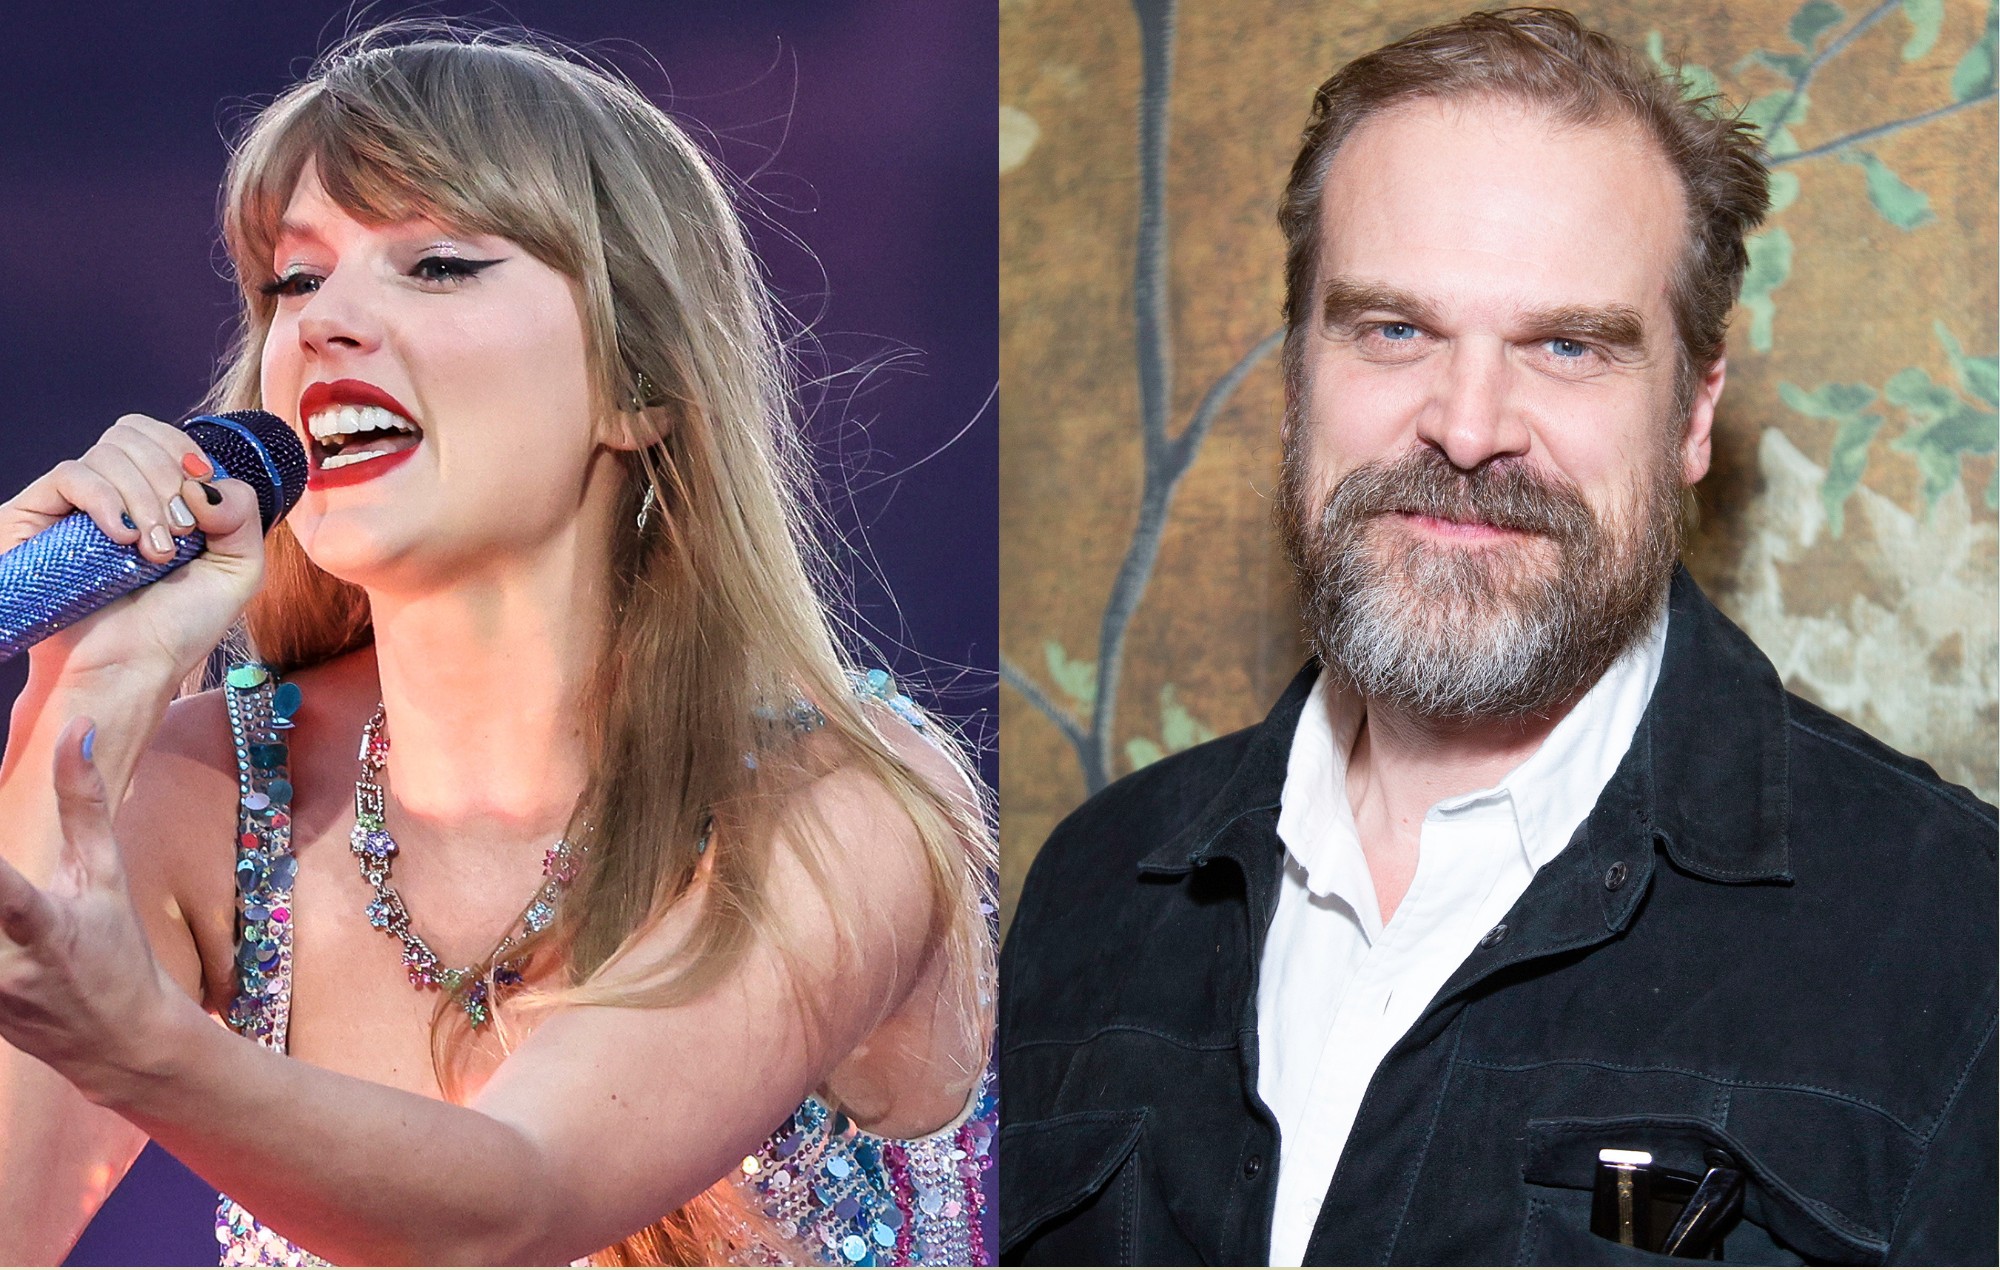 Taylor Swift wrote a personal note for David Harbour's stepdaughter